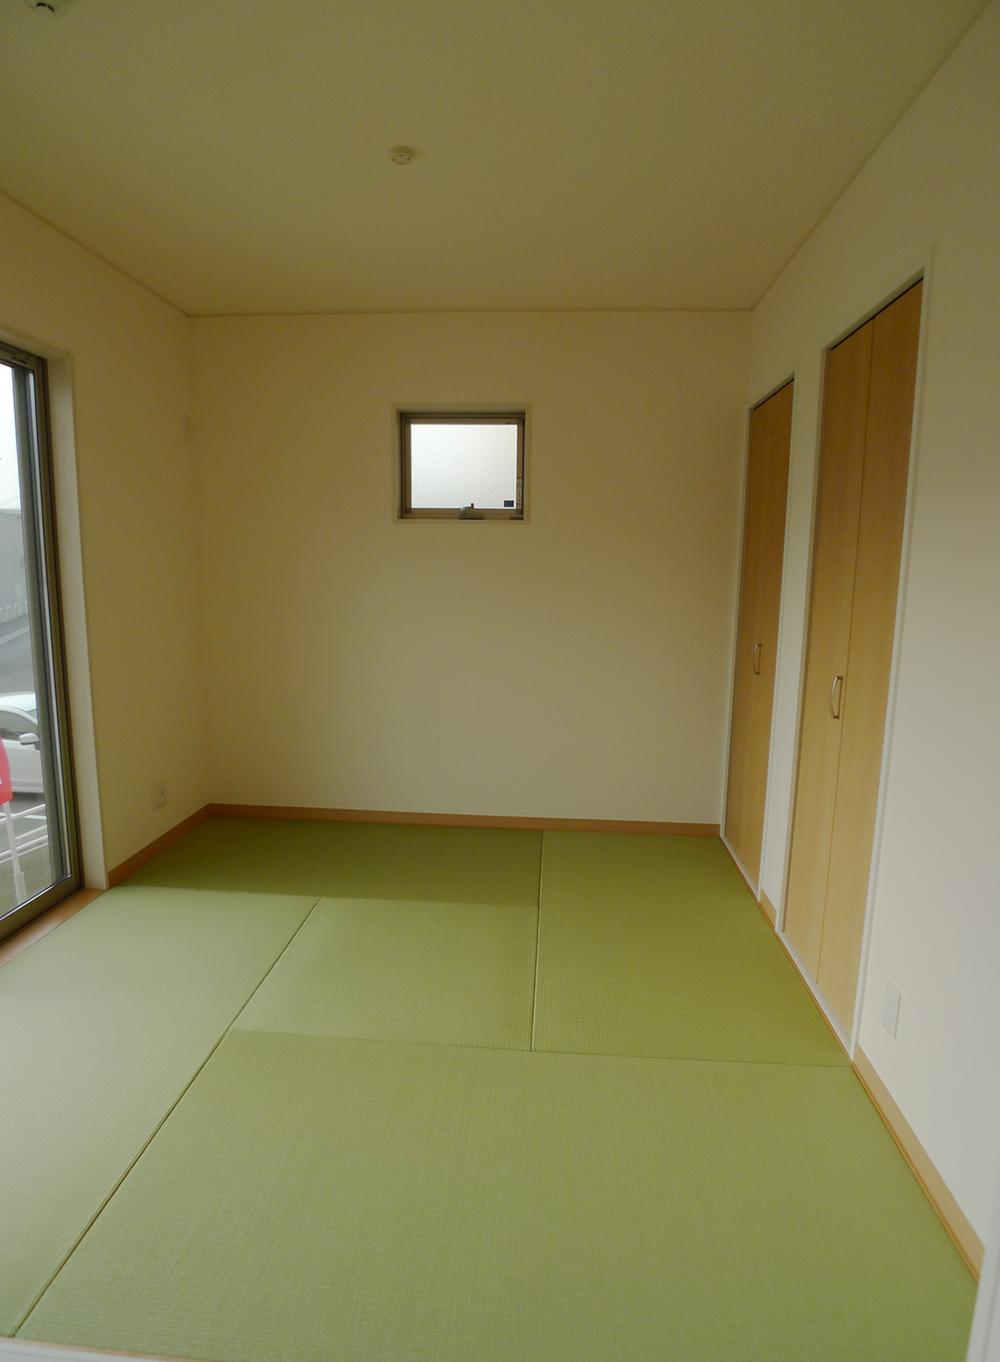 Non-living room. Good Japanese-style room of per yang family of relaxation space